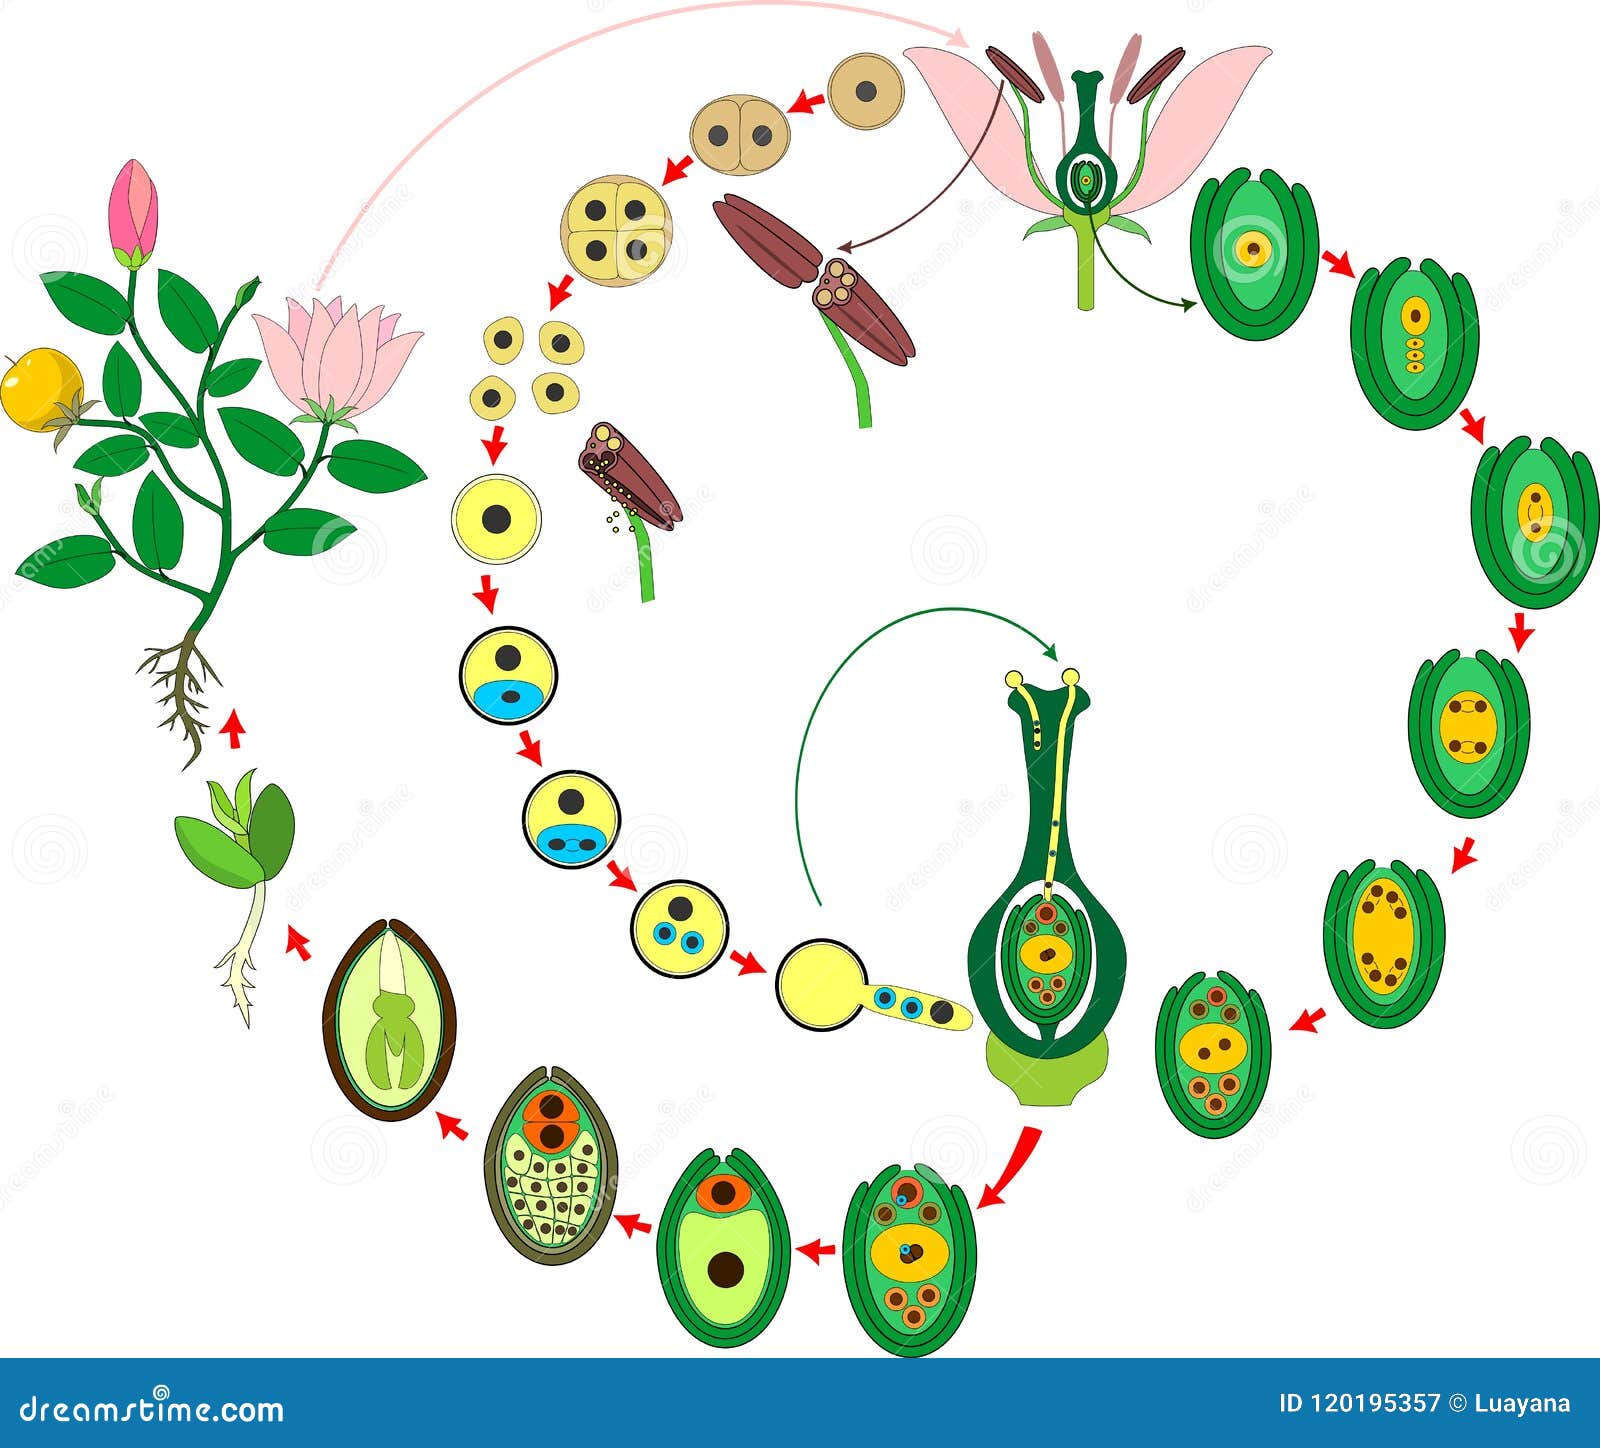 angiosperm plant life cycle. diagram of life cycle of flowering plant with double fertilization